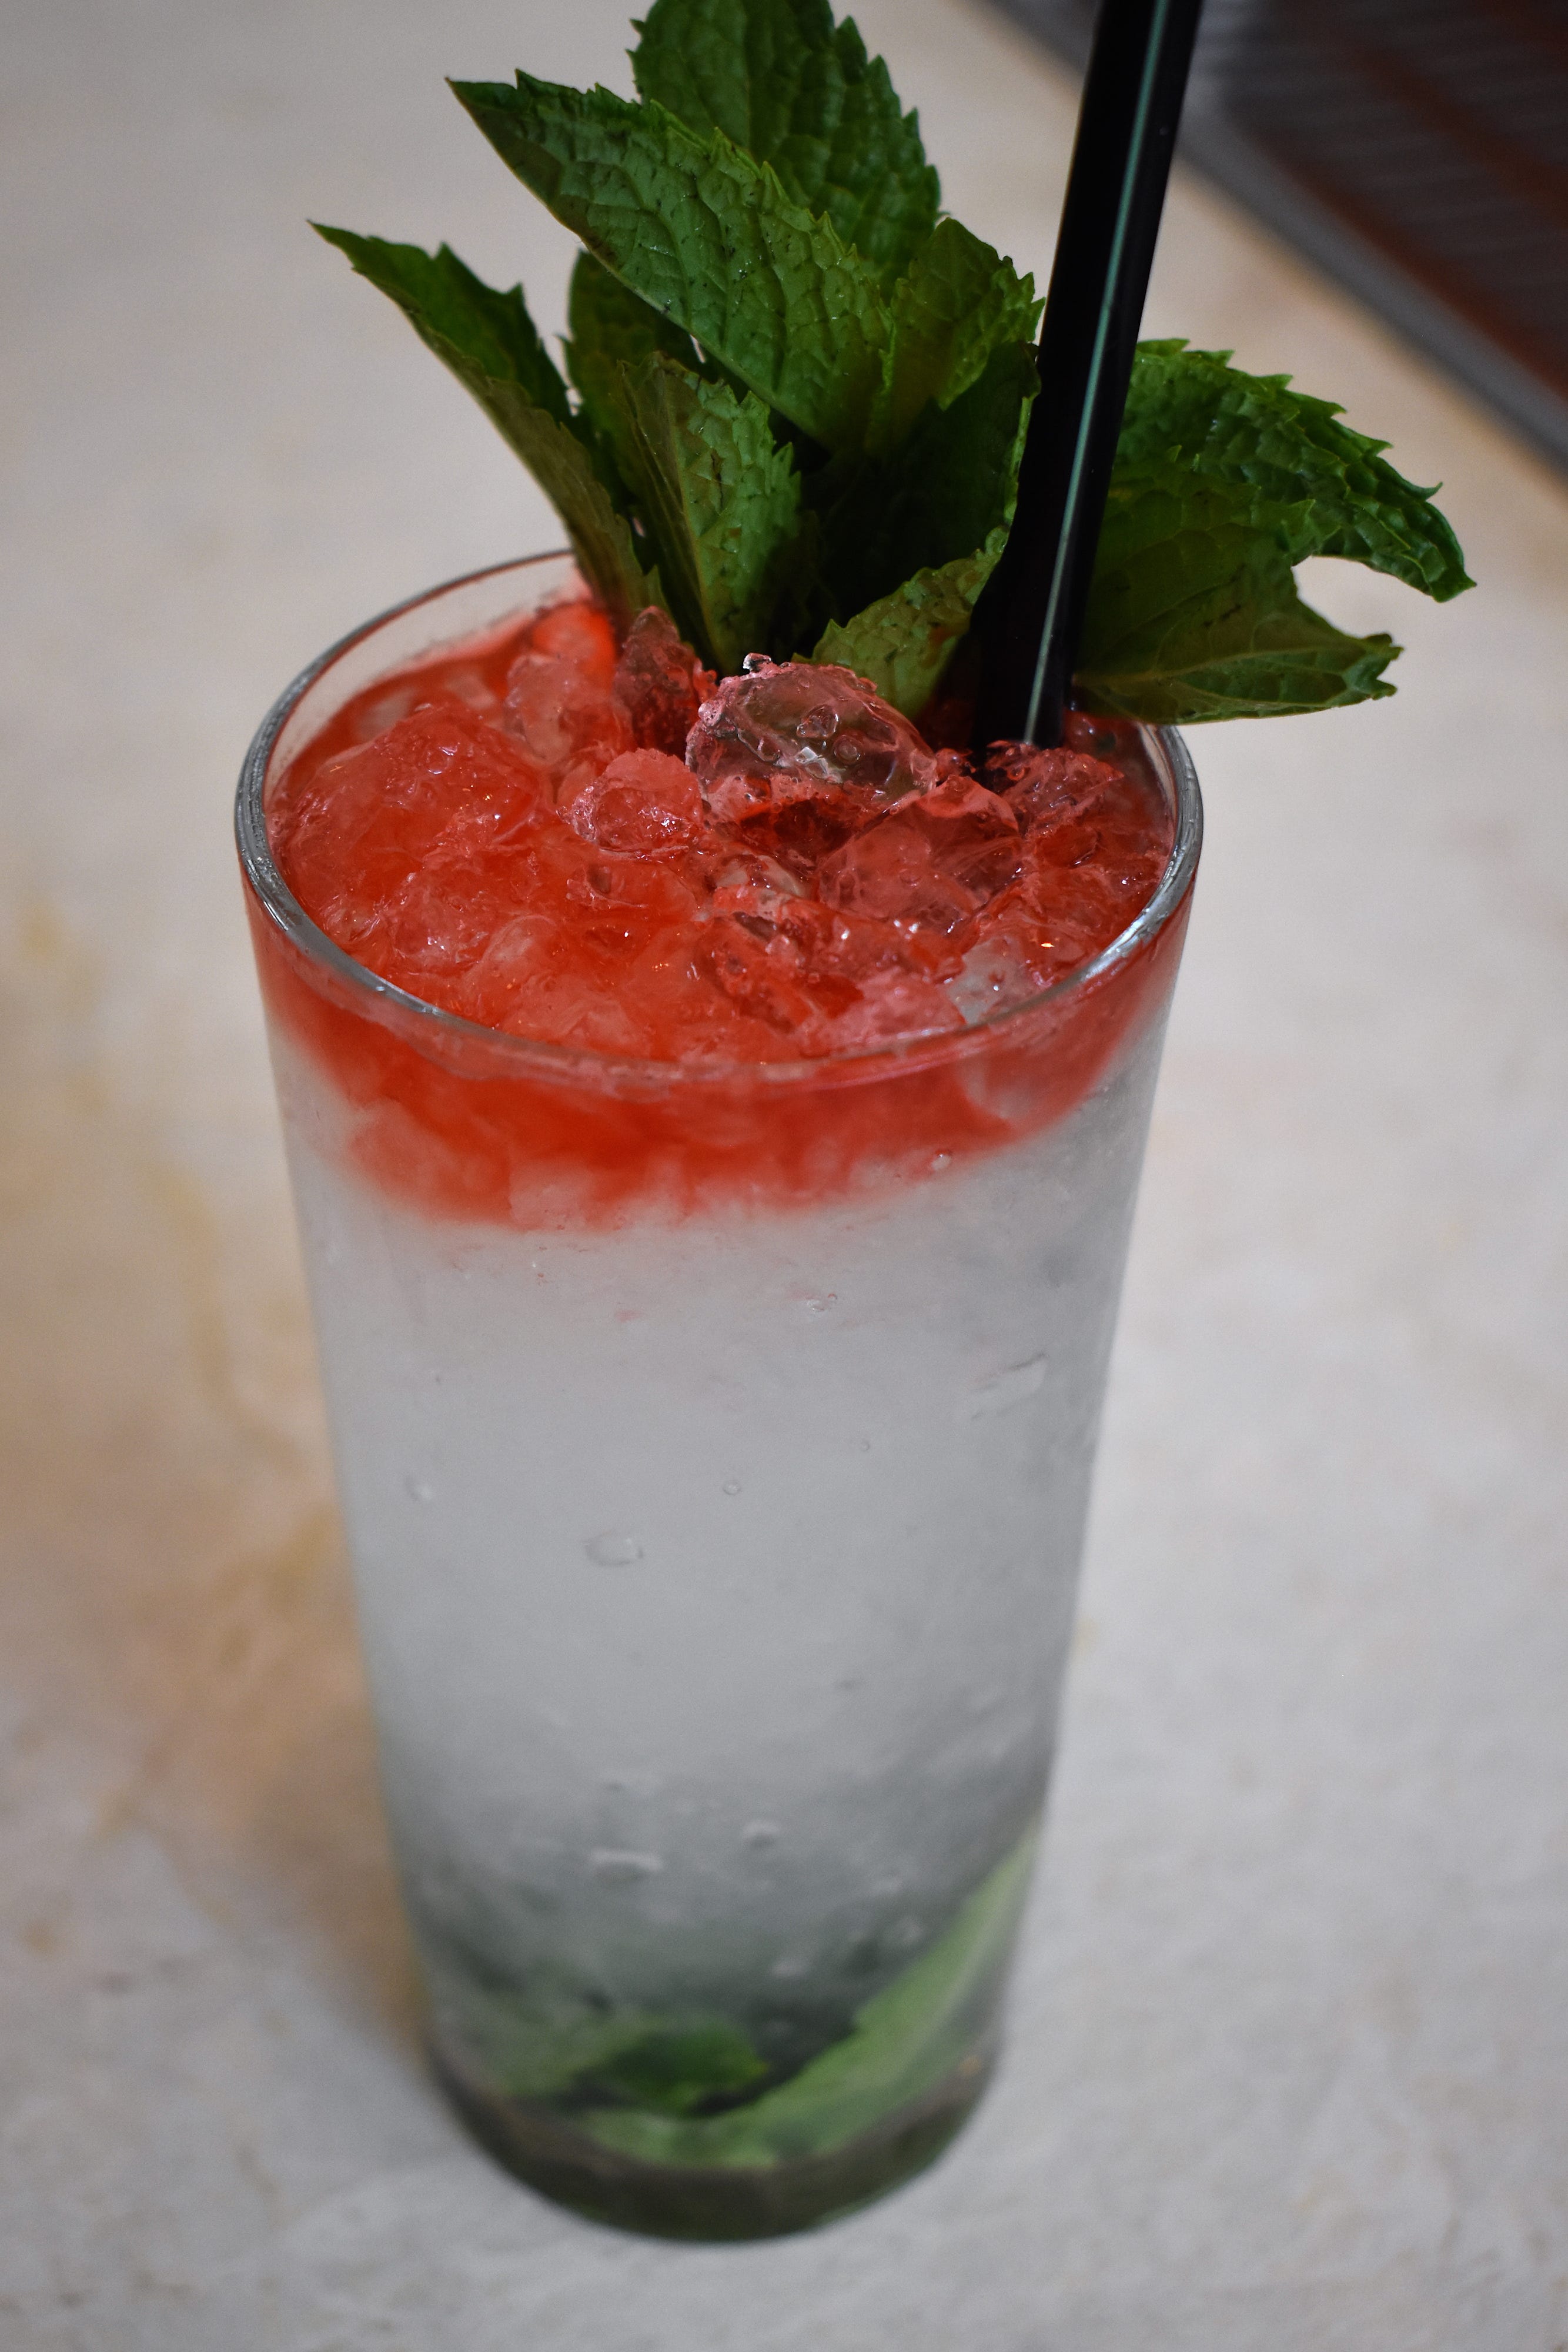 One of the house cocktails is called the "Tricolore Spritz," a mixture of lime, mint,  cucumber syrup, gin, Prosecco and Peychaud’s bitters that bears the same colors as the Italian flag.